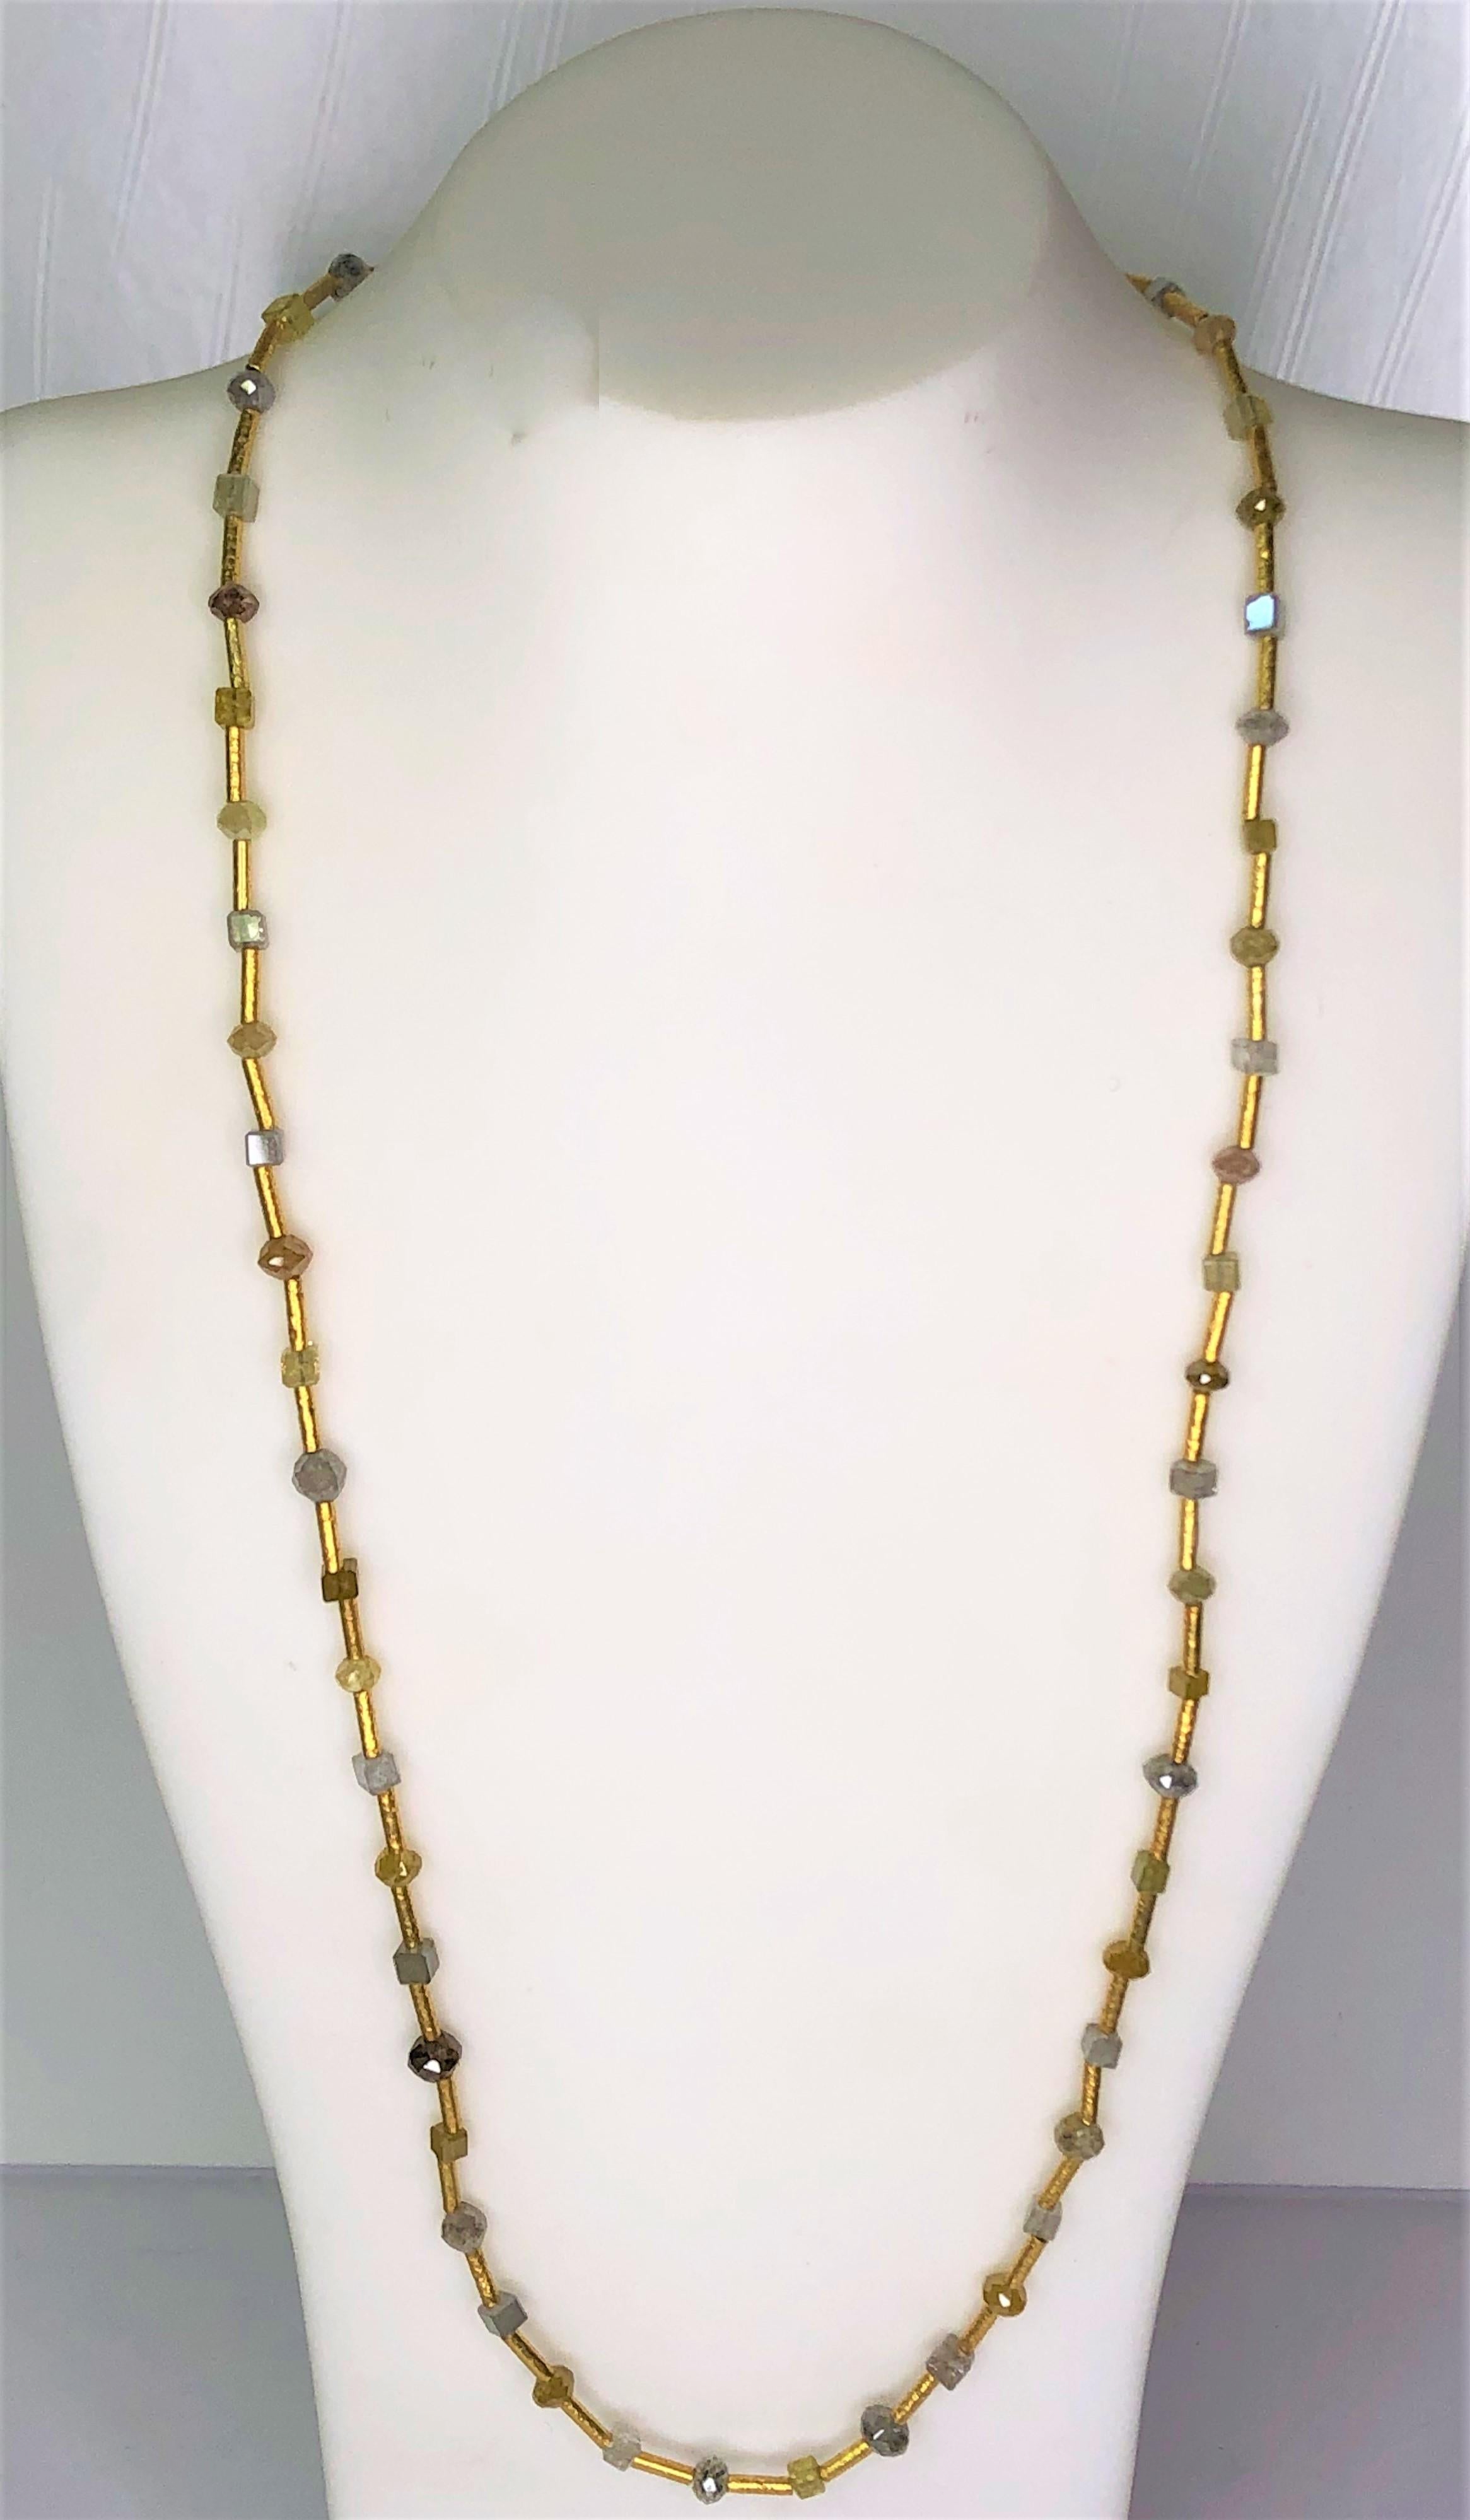 This is true to Karen Melfi's design.  It is simply elegant, made with the best gold and style!
This easy to wear necklace is an everyday wearable necklace.
20 karat yellow gold tubes between natural color diamonds.
Multi-color diamonds in bead and